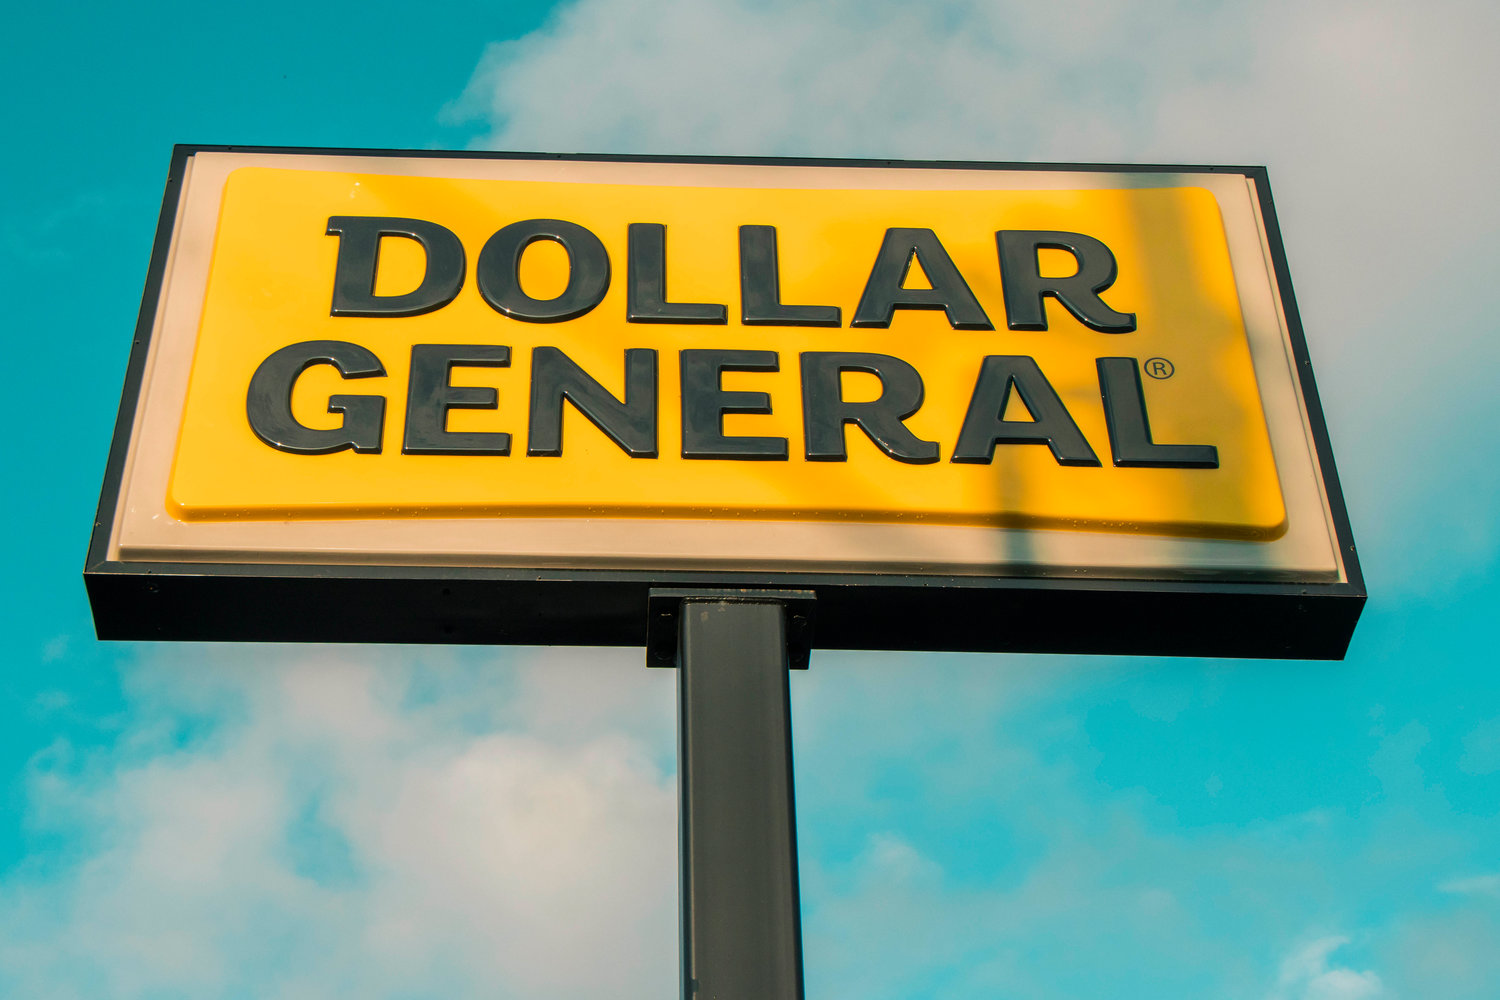 FILE PHOTO — The Dollar General at 405 E. Summa St. in Centralia is now open.